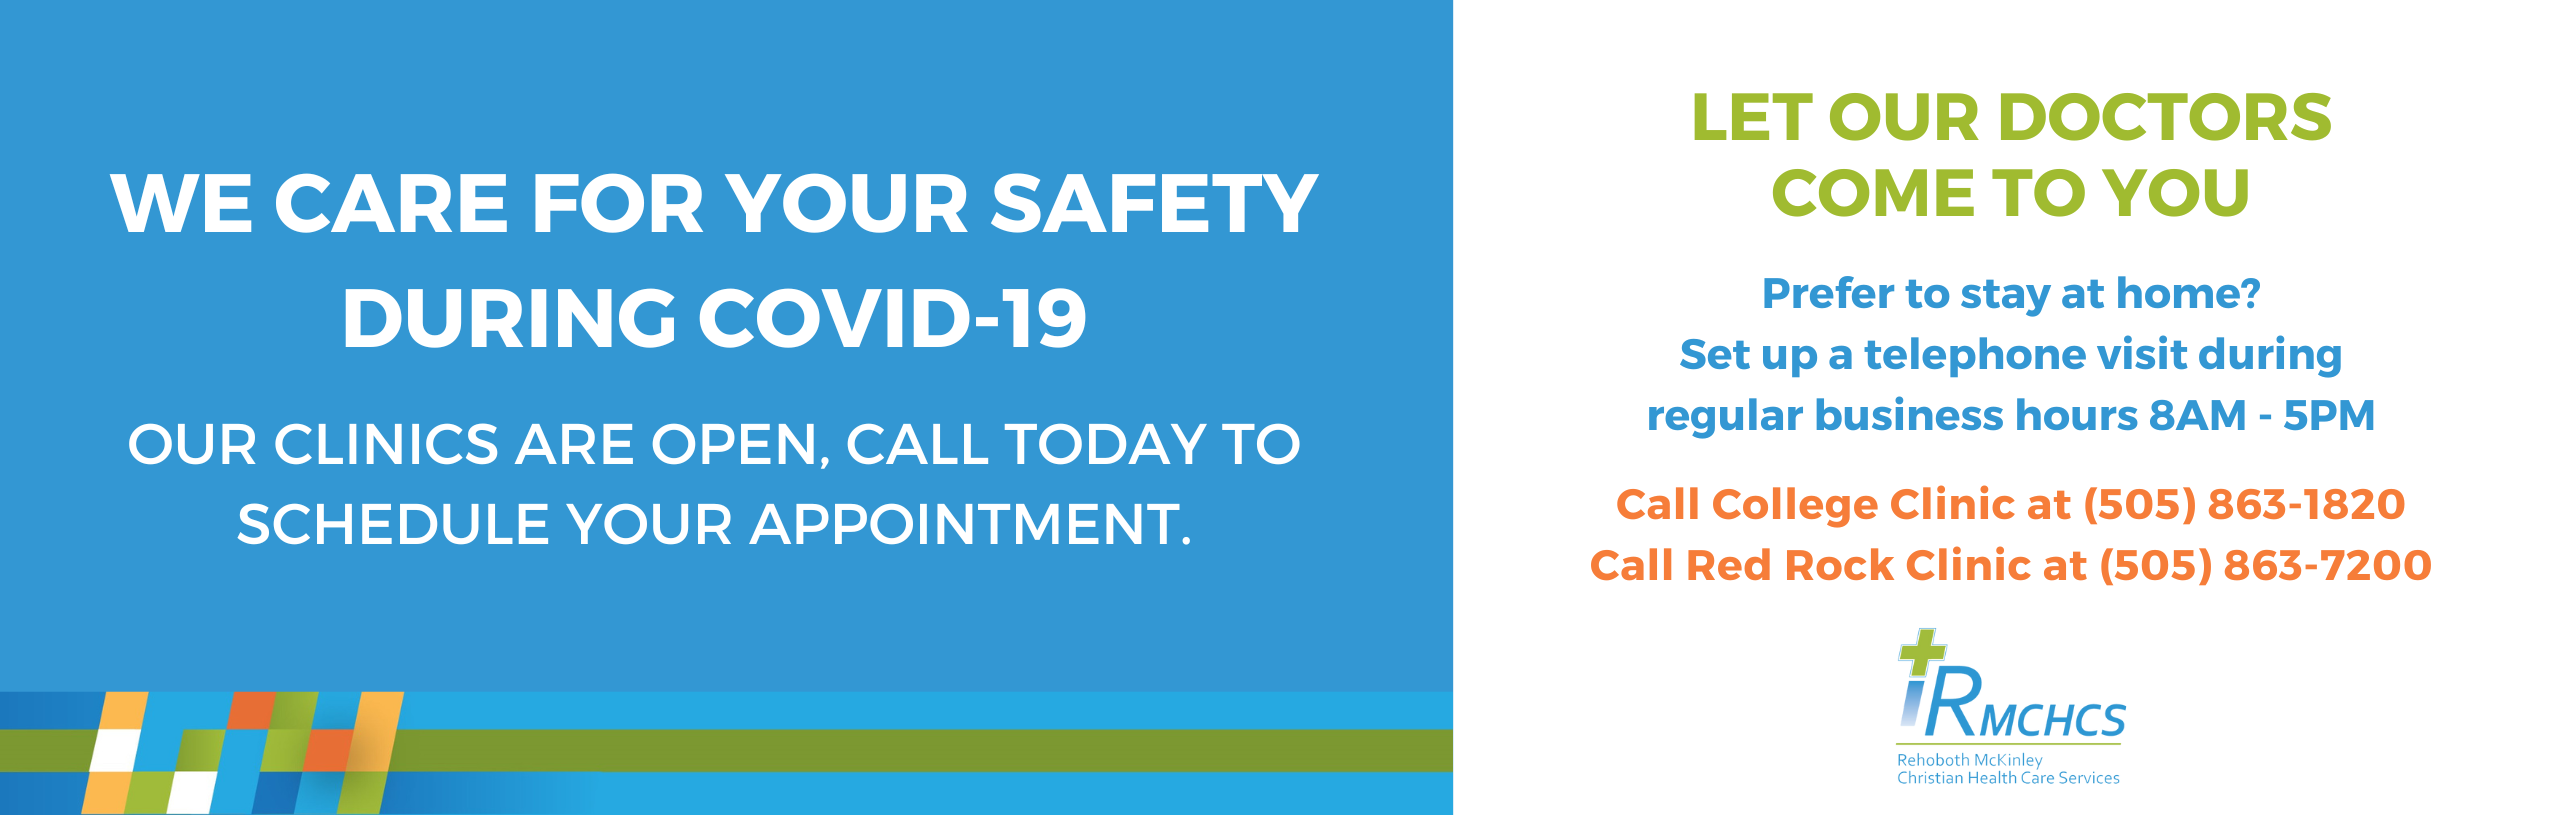 Banner that says:

WE CARE FOR YOUR SAFETY DURING COVID-19
OUR CLINICS ARE OPEN, CALL TODAY TO SCHEDULE YOUR APPOINTMENT.

LET OUR DOCTOR COME TO YOU
PREFER TO STAY AT HOME?
SET UP A TELEPHONE VISIT
REGULAR BUSINESS HOURS 8AM-5PM

CALL COLLEGE CLNIC AT (505) 863-1820
CALL RED ROCK CLINIC AT (505)863-7200